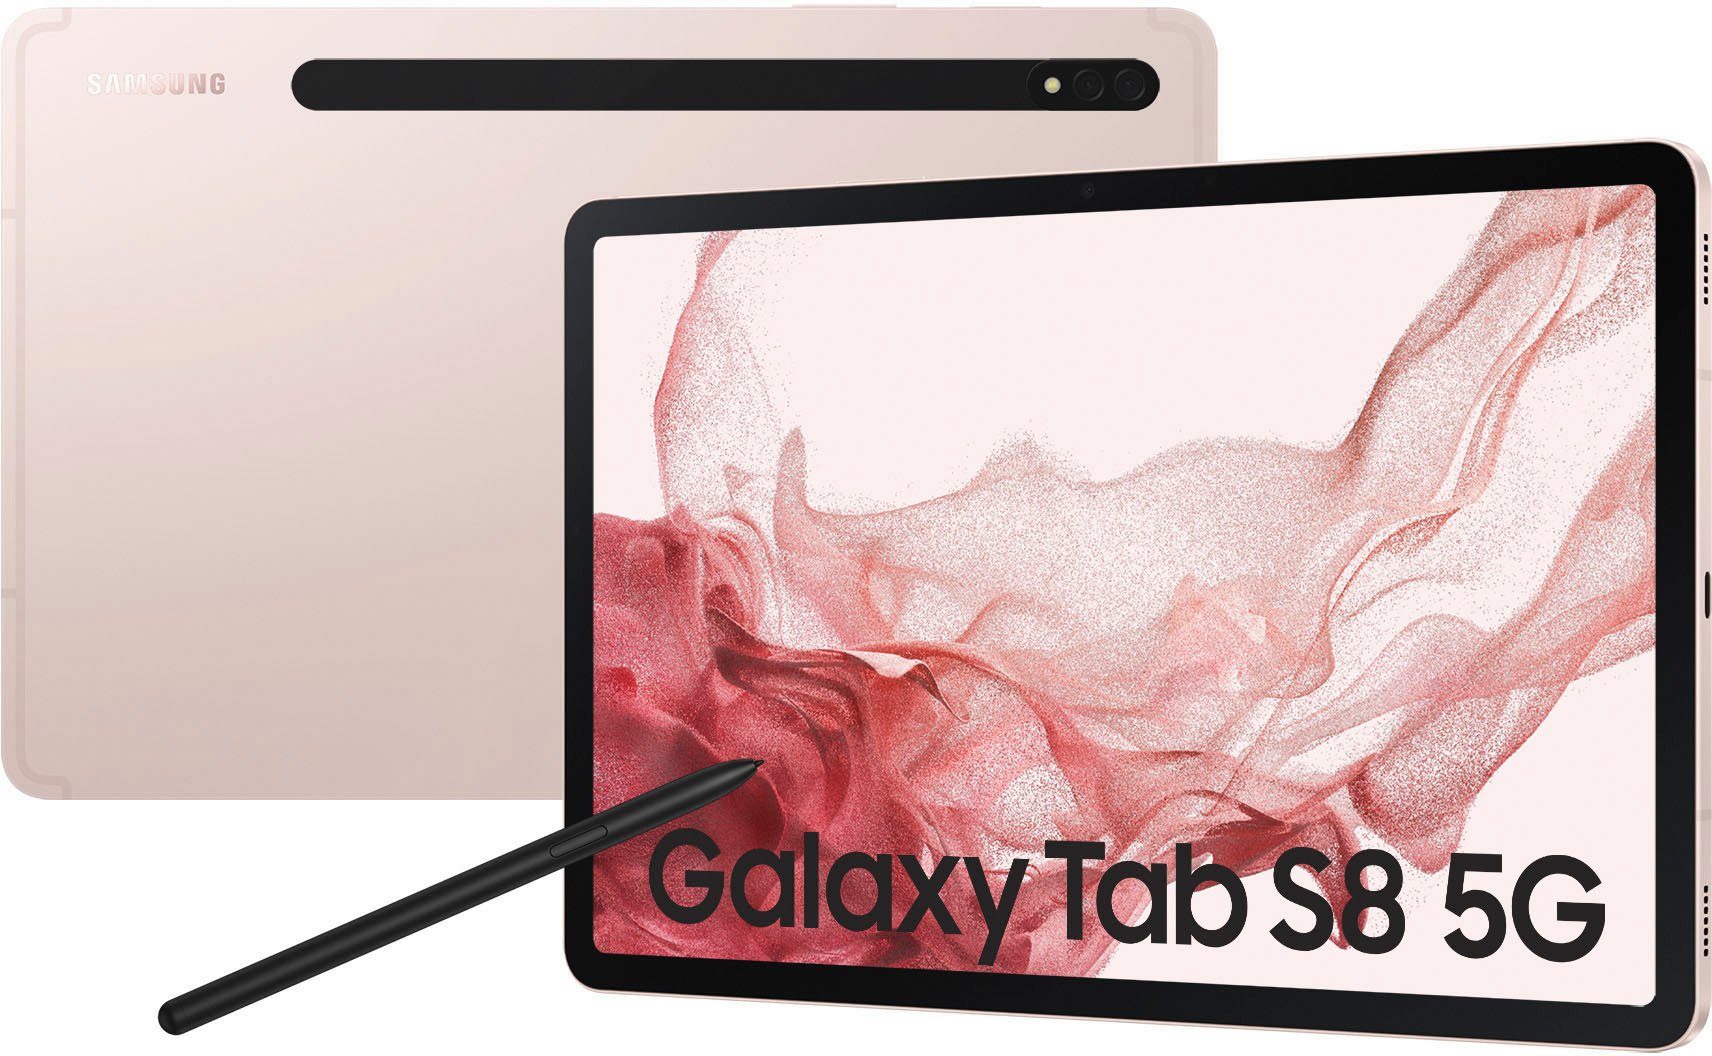 S8 Android, Samsung (11", Pink Tablet Gold 5G) GB, Tab Galaxy 128 5G